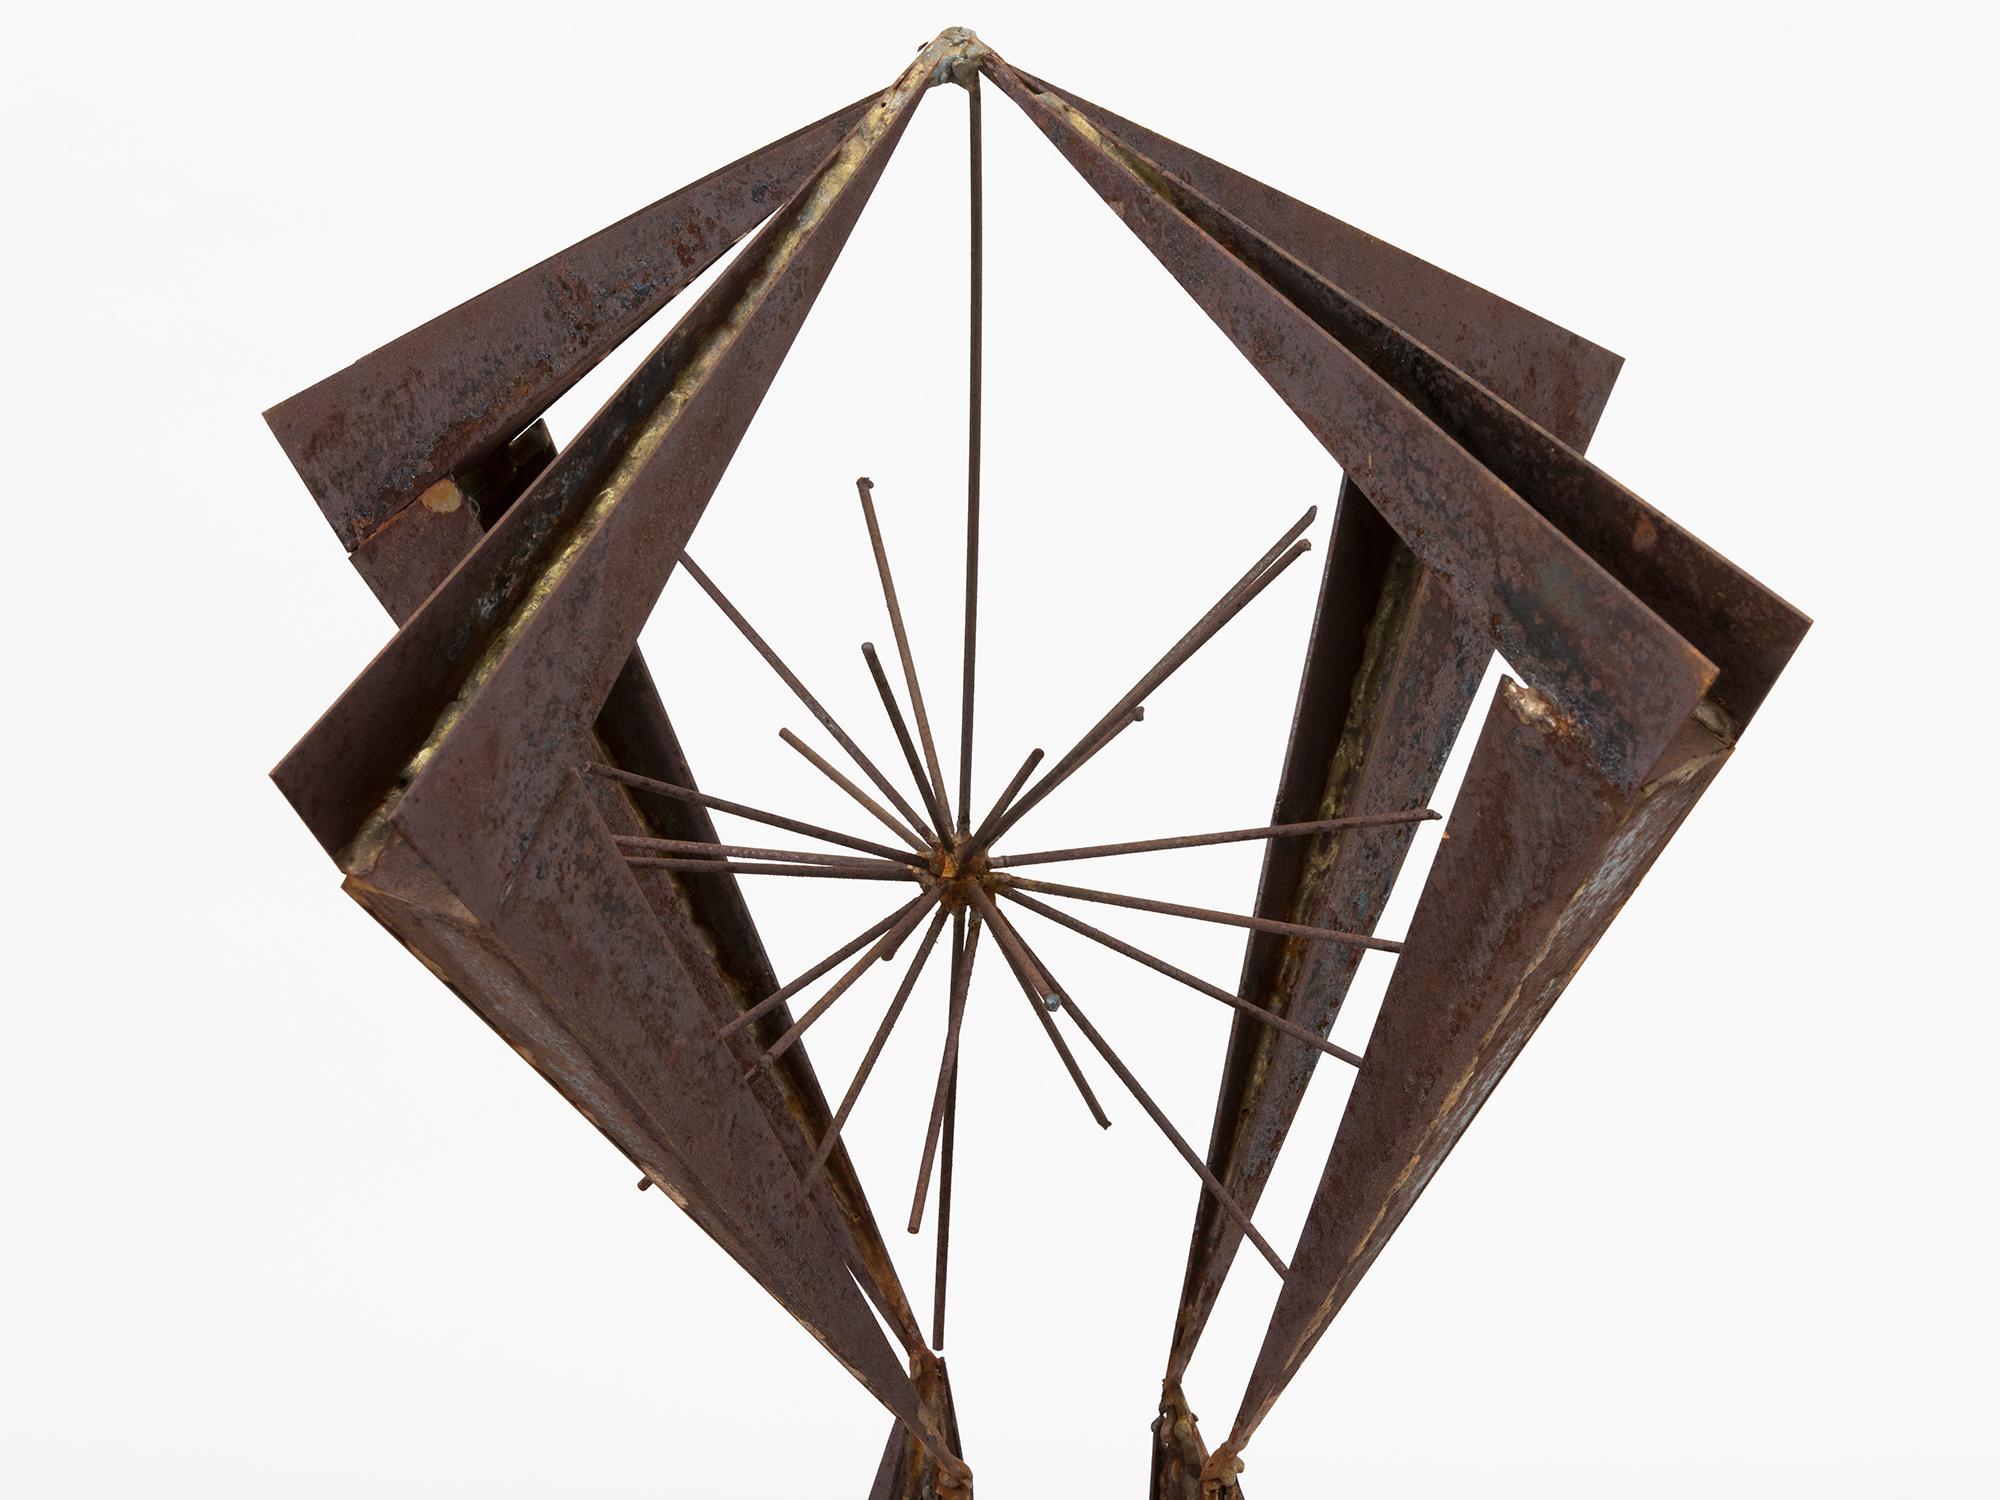 Large and unusual folded modernist iron and brass welded sculpture by an unknown artist in the manner of Paul Evans. Can be displayed both inside or outside.